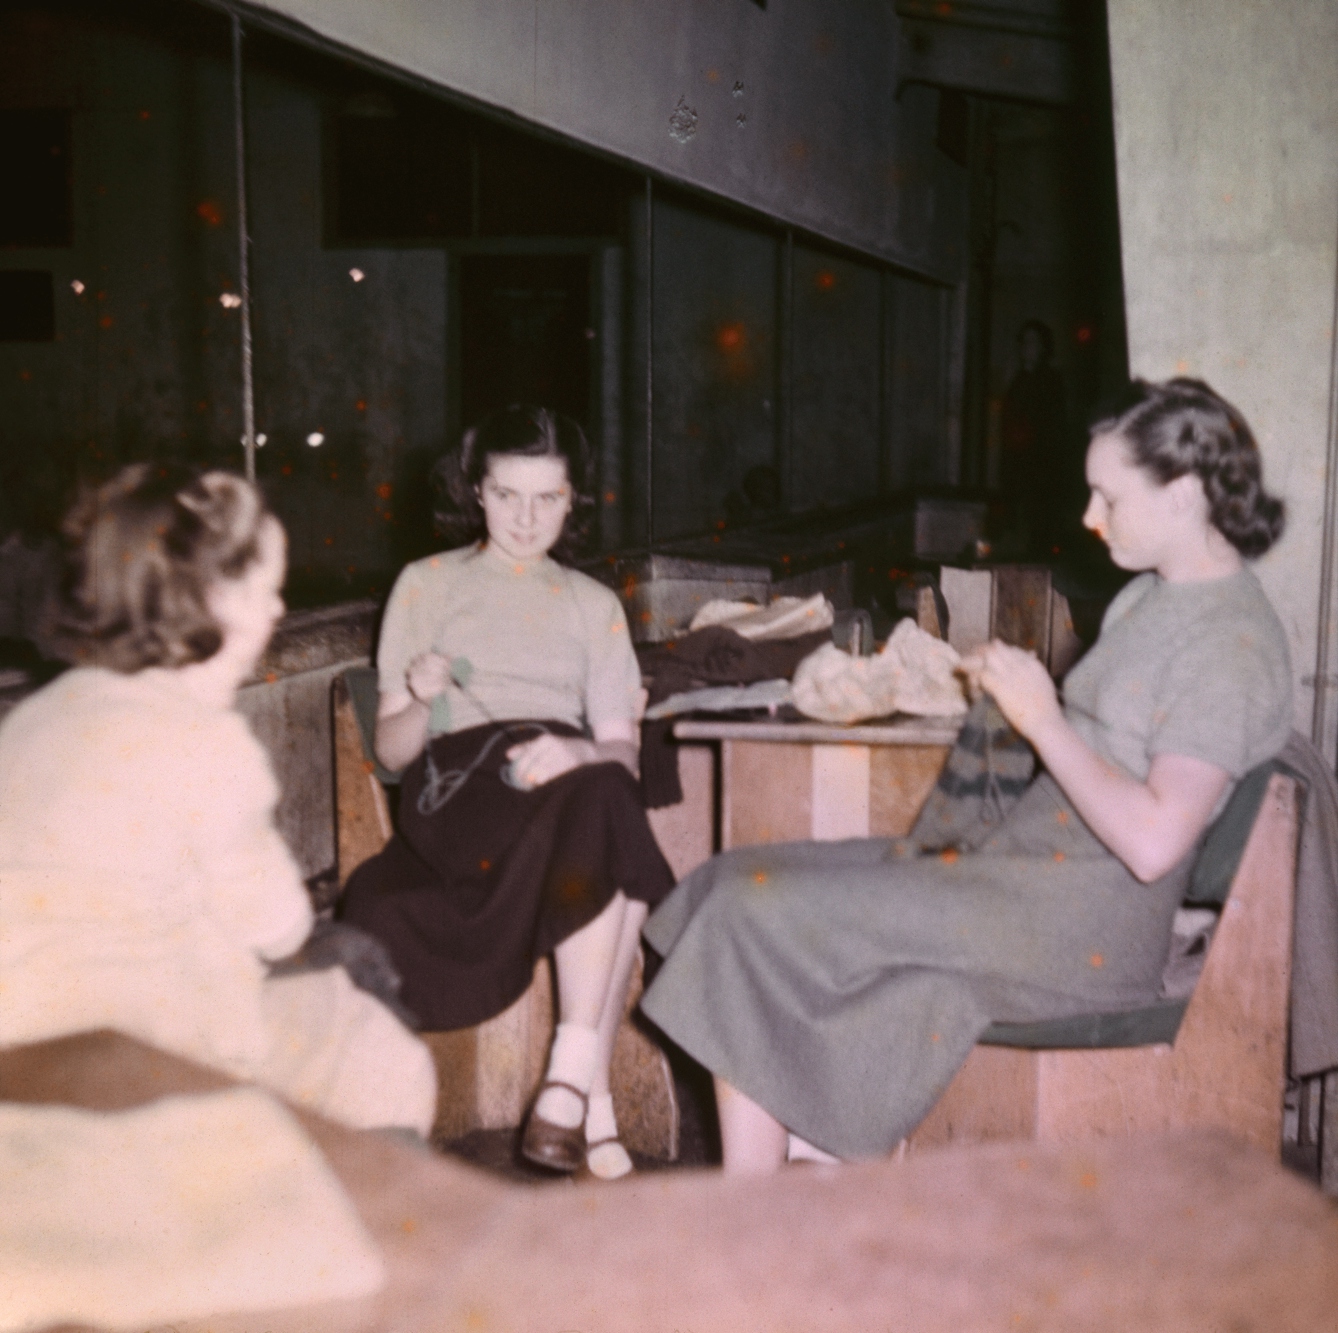 Photograph from the mid-20th Century Peckham Pioneer Centre, showing three women seated at a table, knitting. The building in which they sit has concrete columns and large windows.